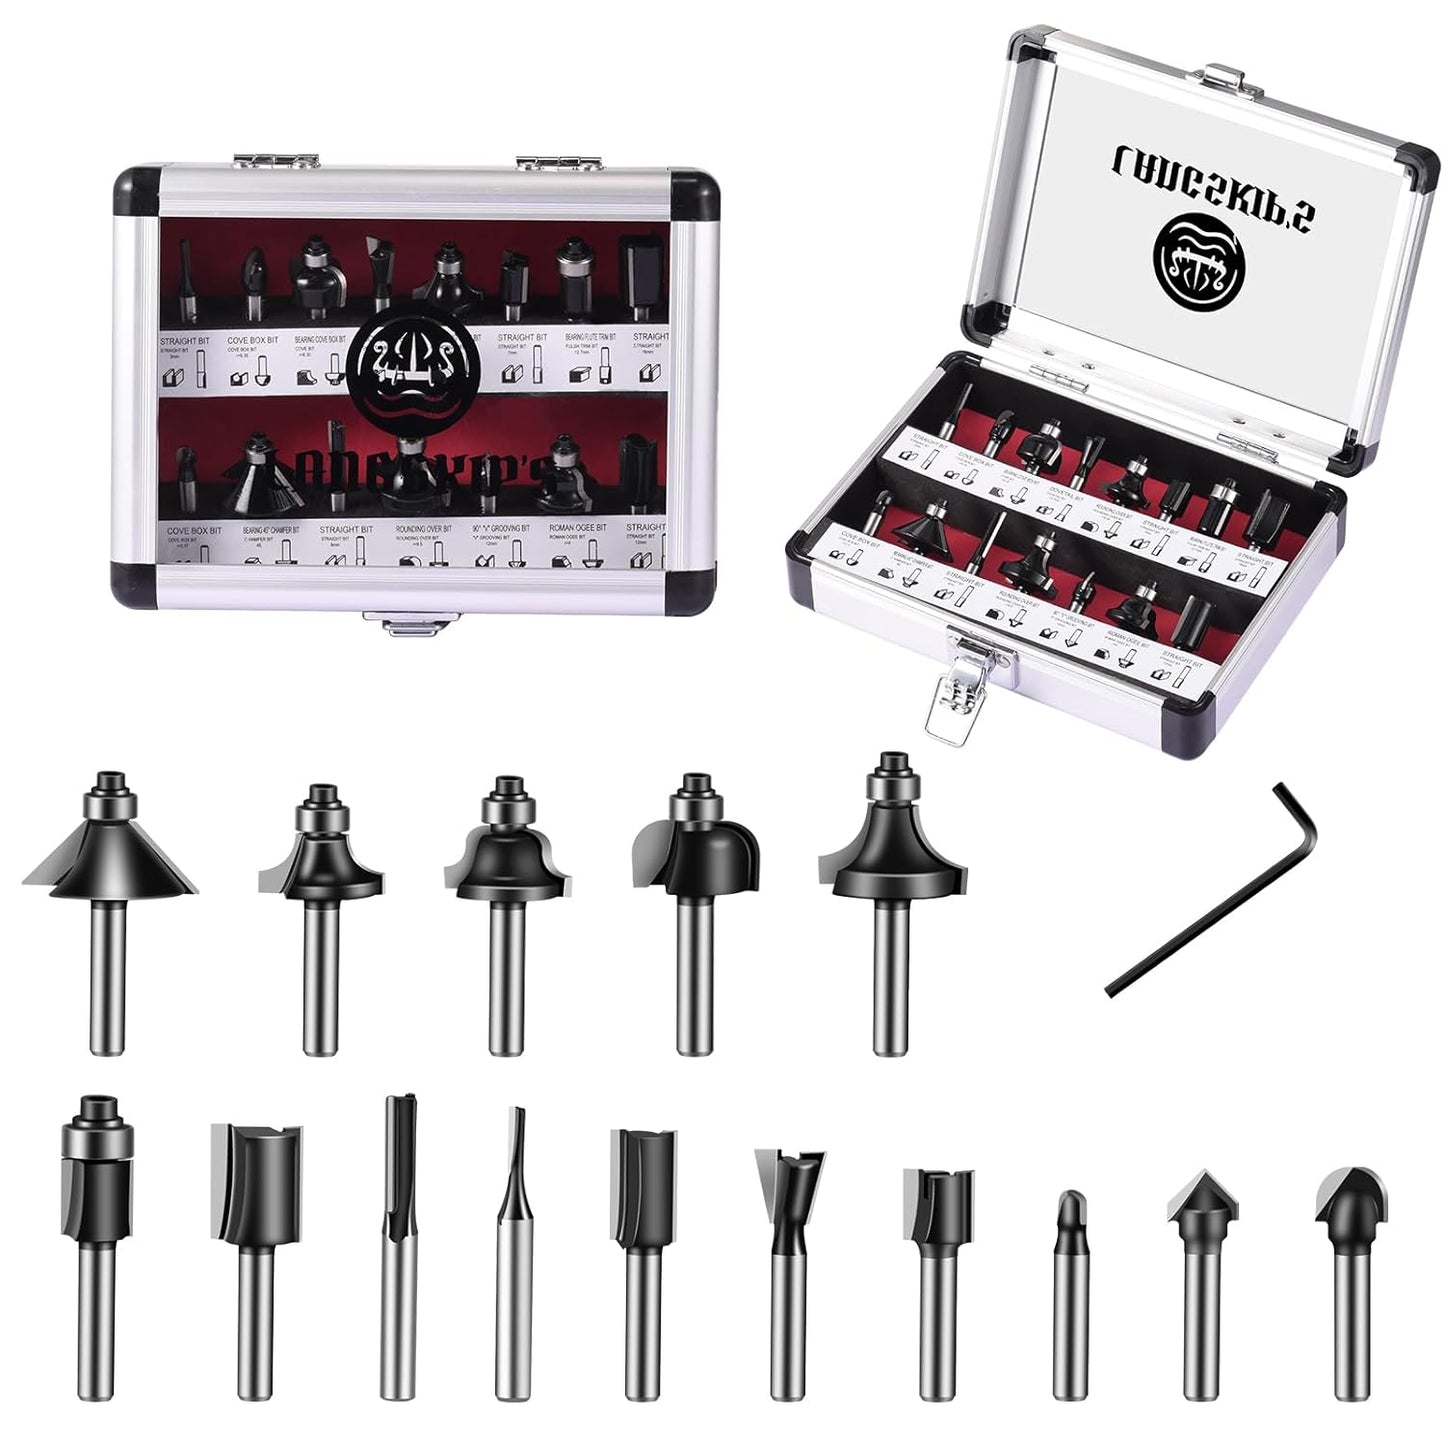 15 Pieces Carbide Router Bit Set 1/4 Shank Made of 45# Carbon Steel YG8 Alloy Blade for Woodwork Tools